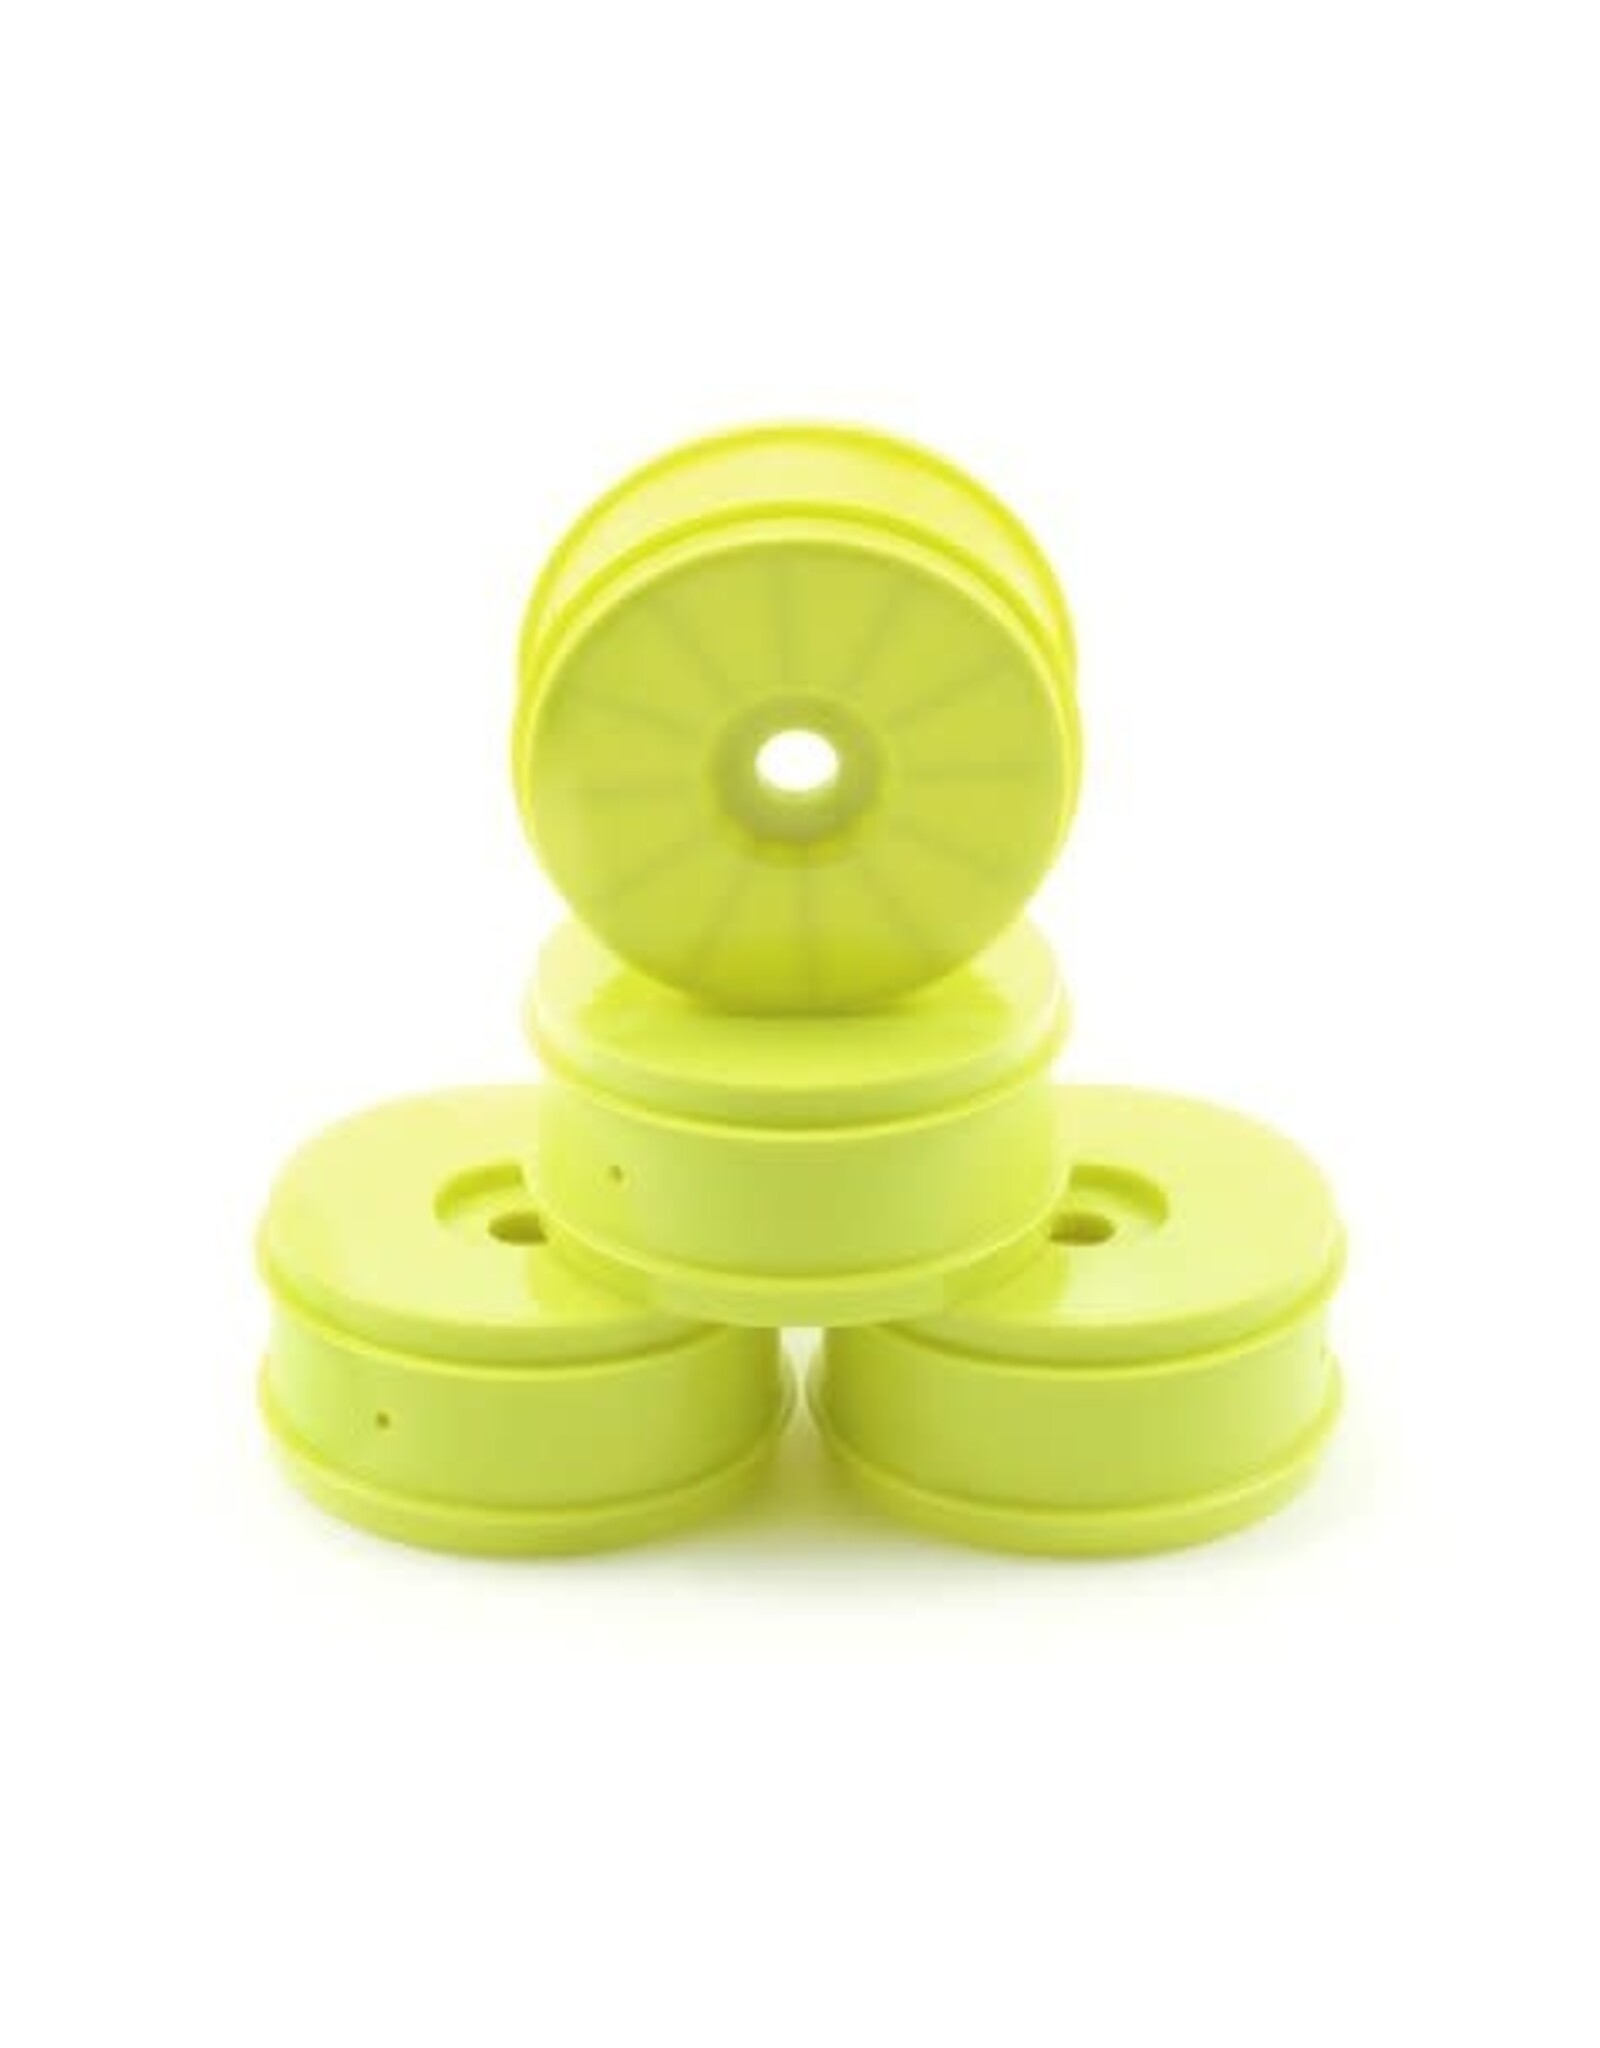 Pro-Line Velocity Yellow Fr/Re Wheels (4) for 1/8 Buggy